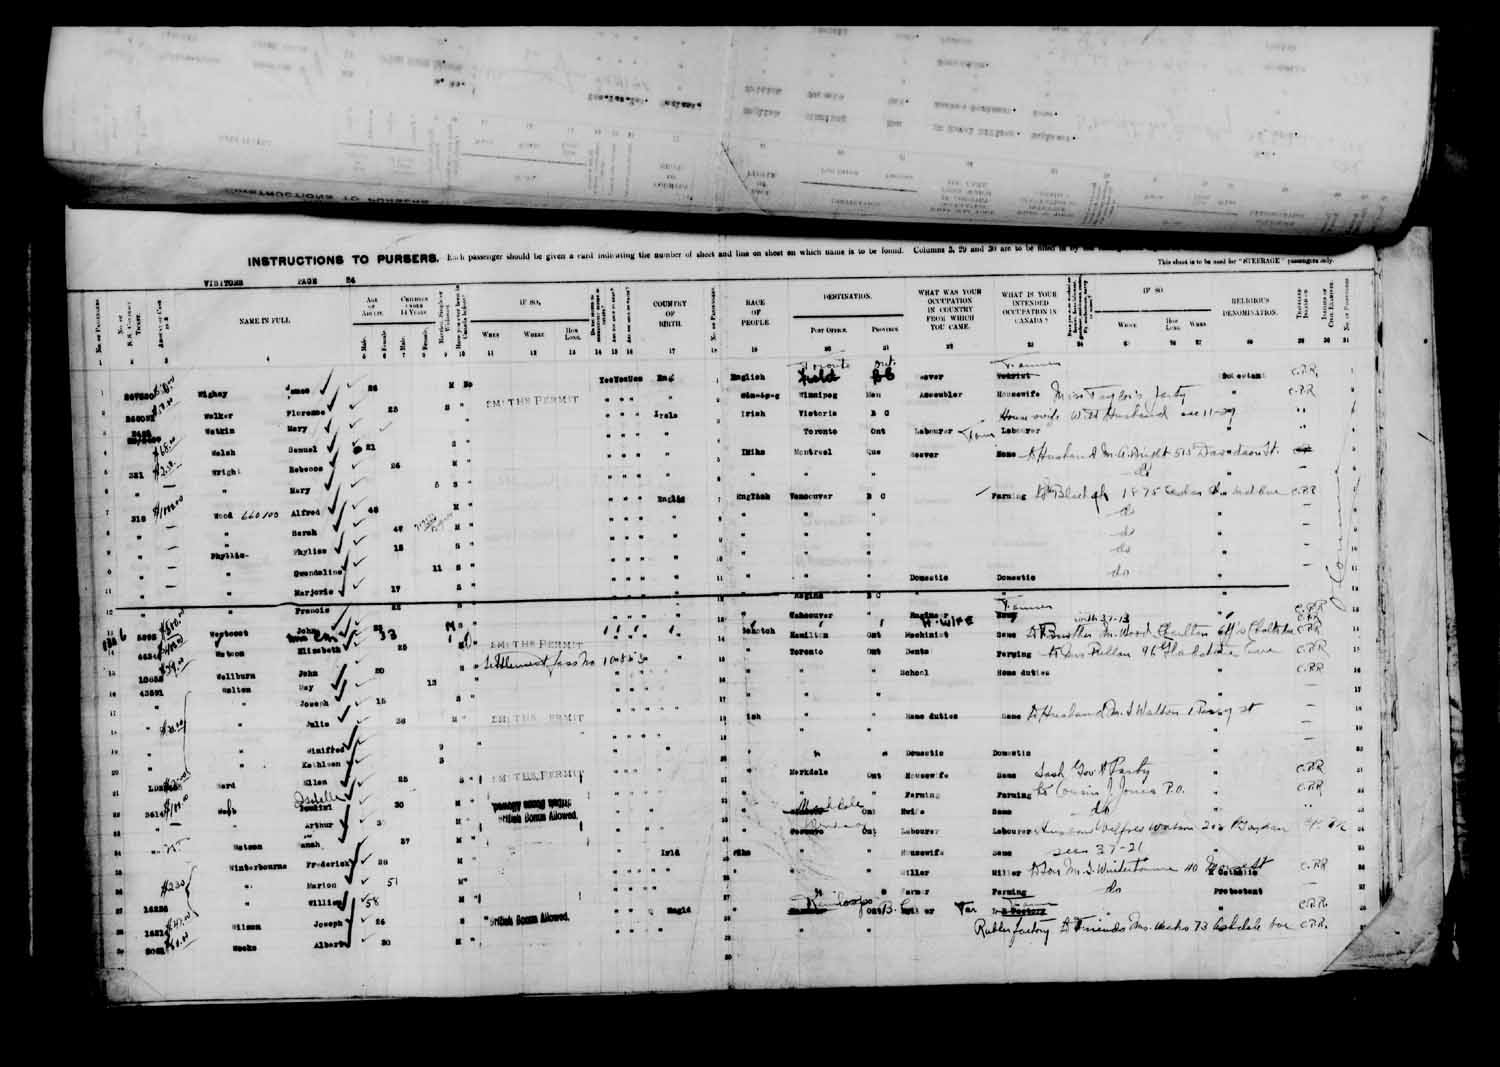 Digitized page of Passenger Lists for Image No.: e003610664